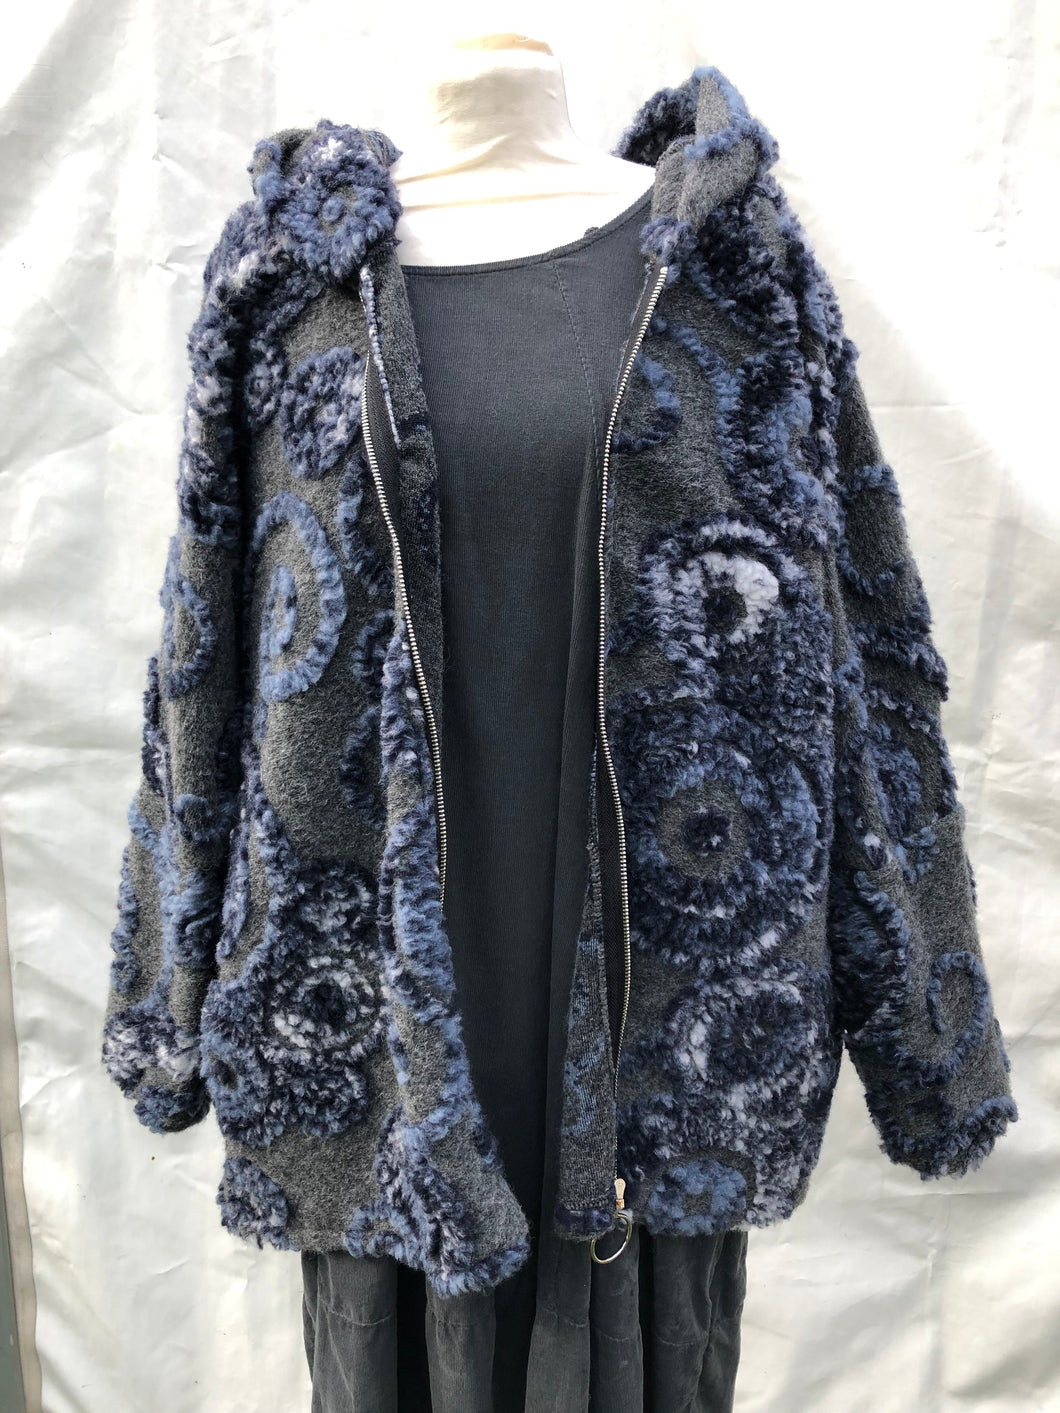 Grey with navy, blue ad white swirl design 100% wool coat